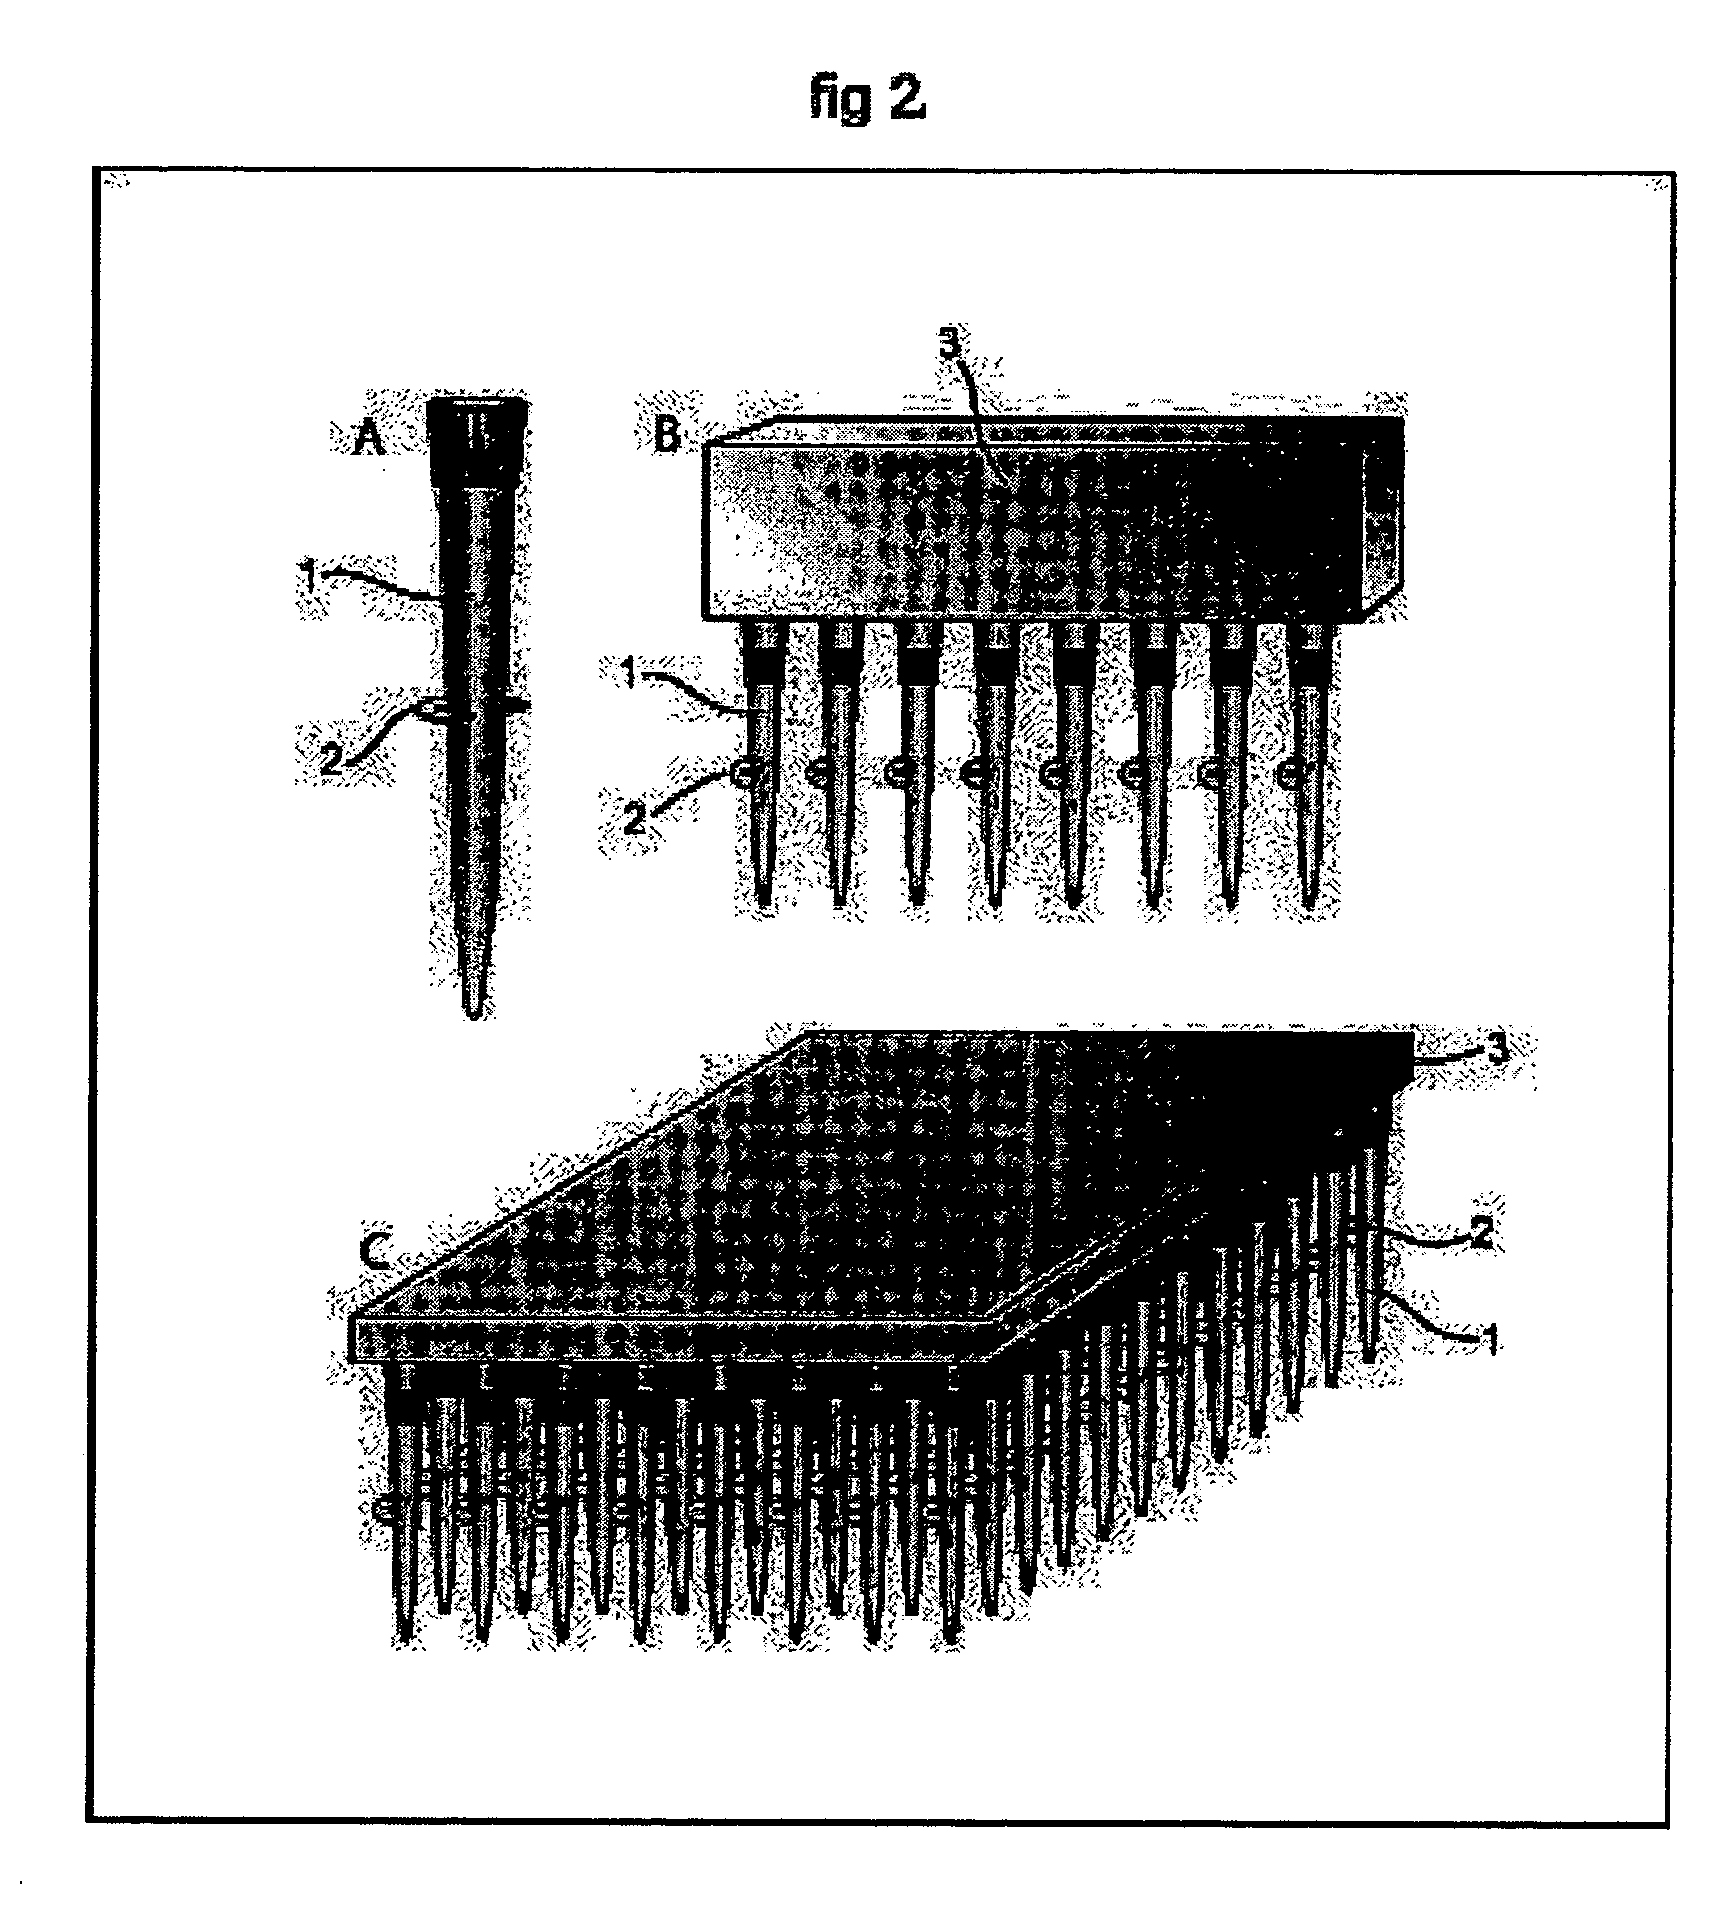 Method and apparatus for spatially confined electroporation